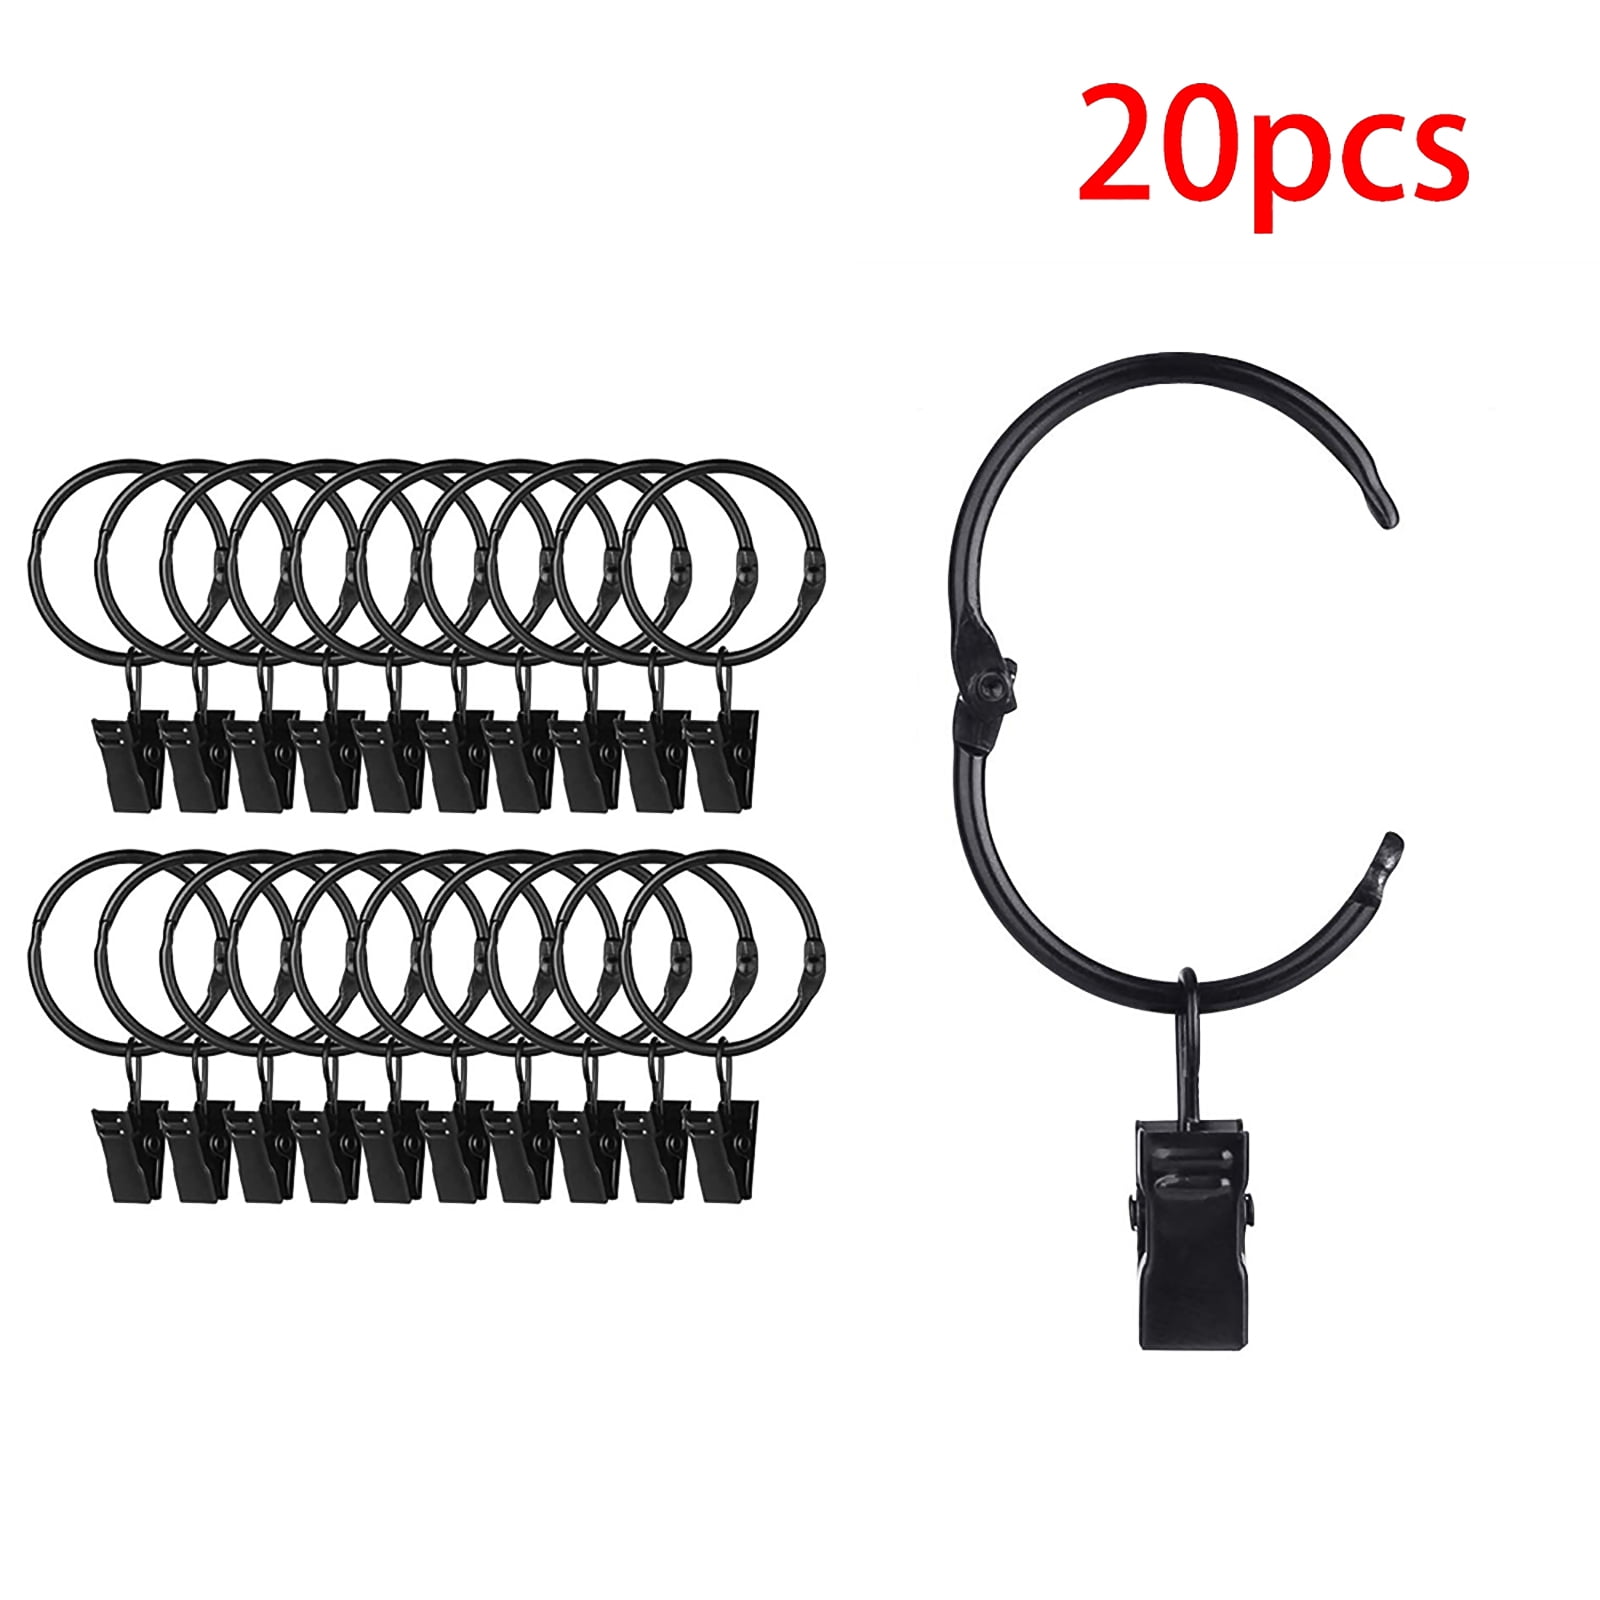 20pcs Metal Curtain Rings Clips Hanging Hooks Stainless Steel on Pole Rod UK 